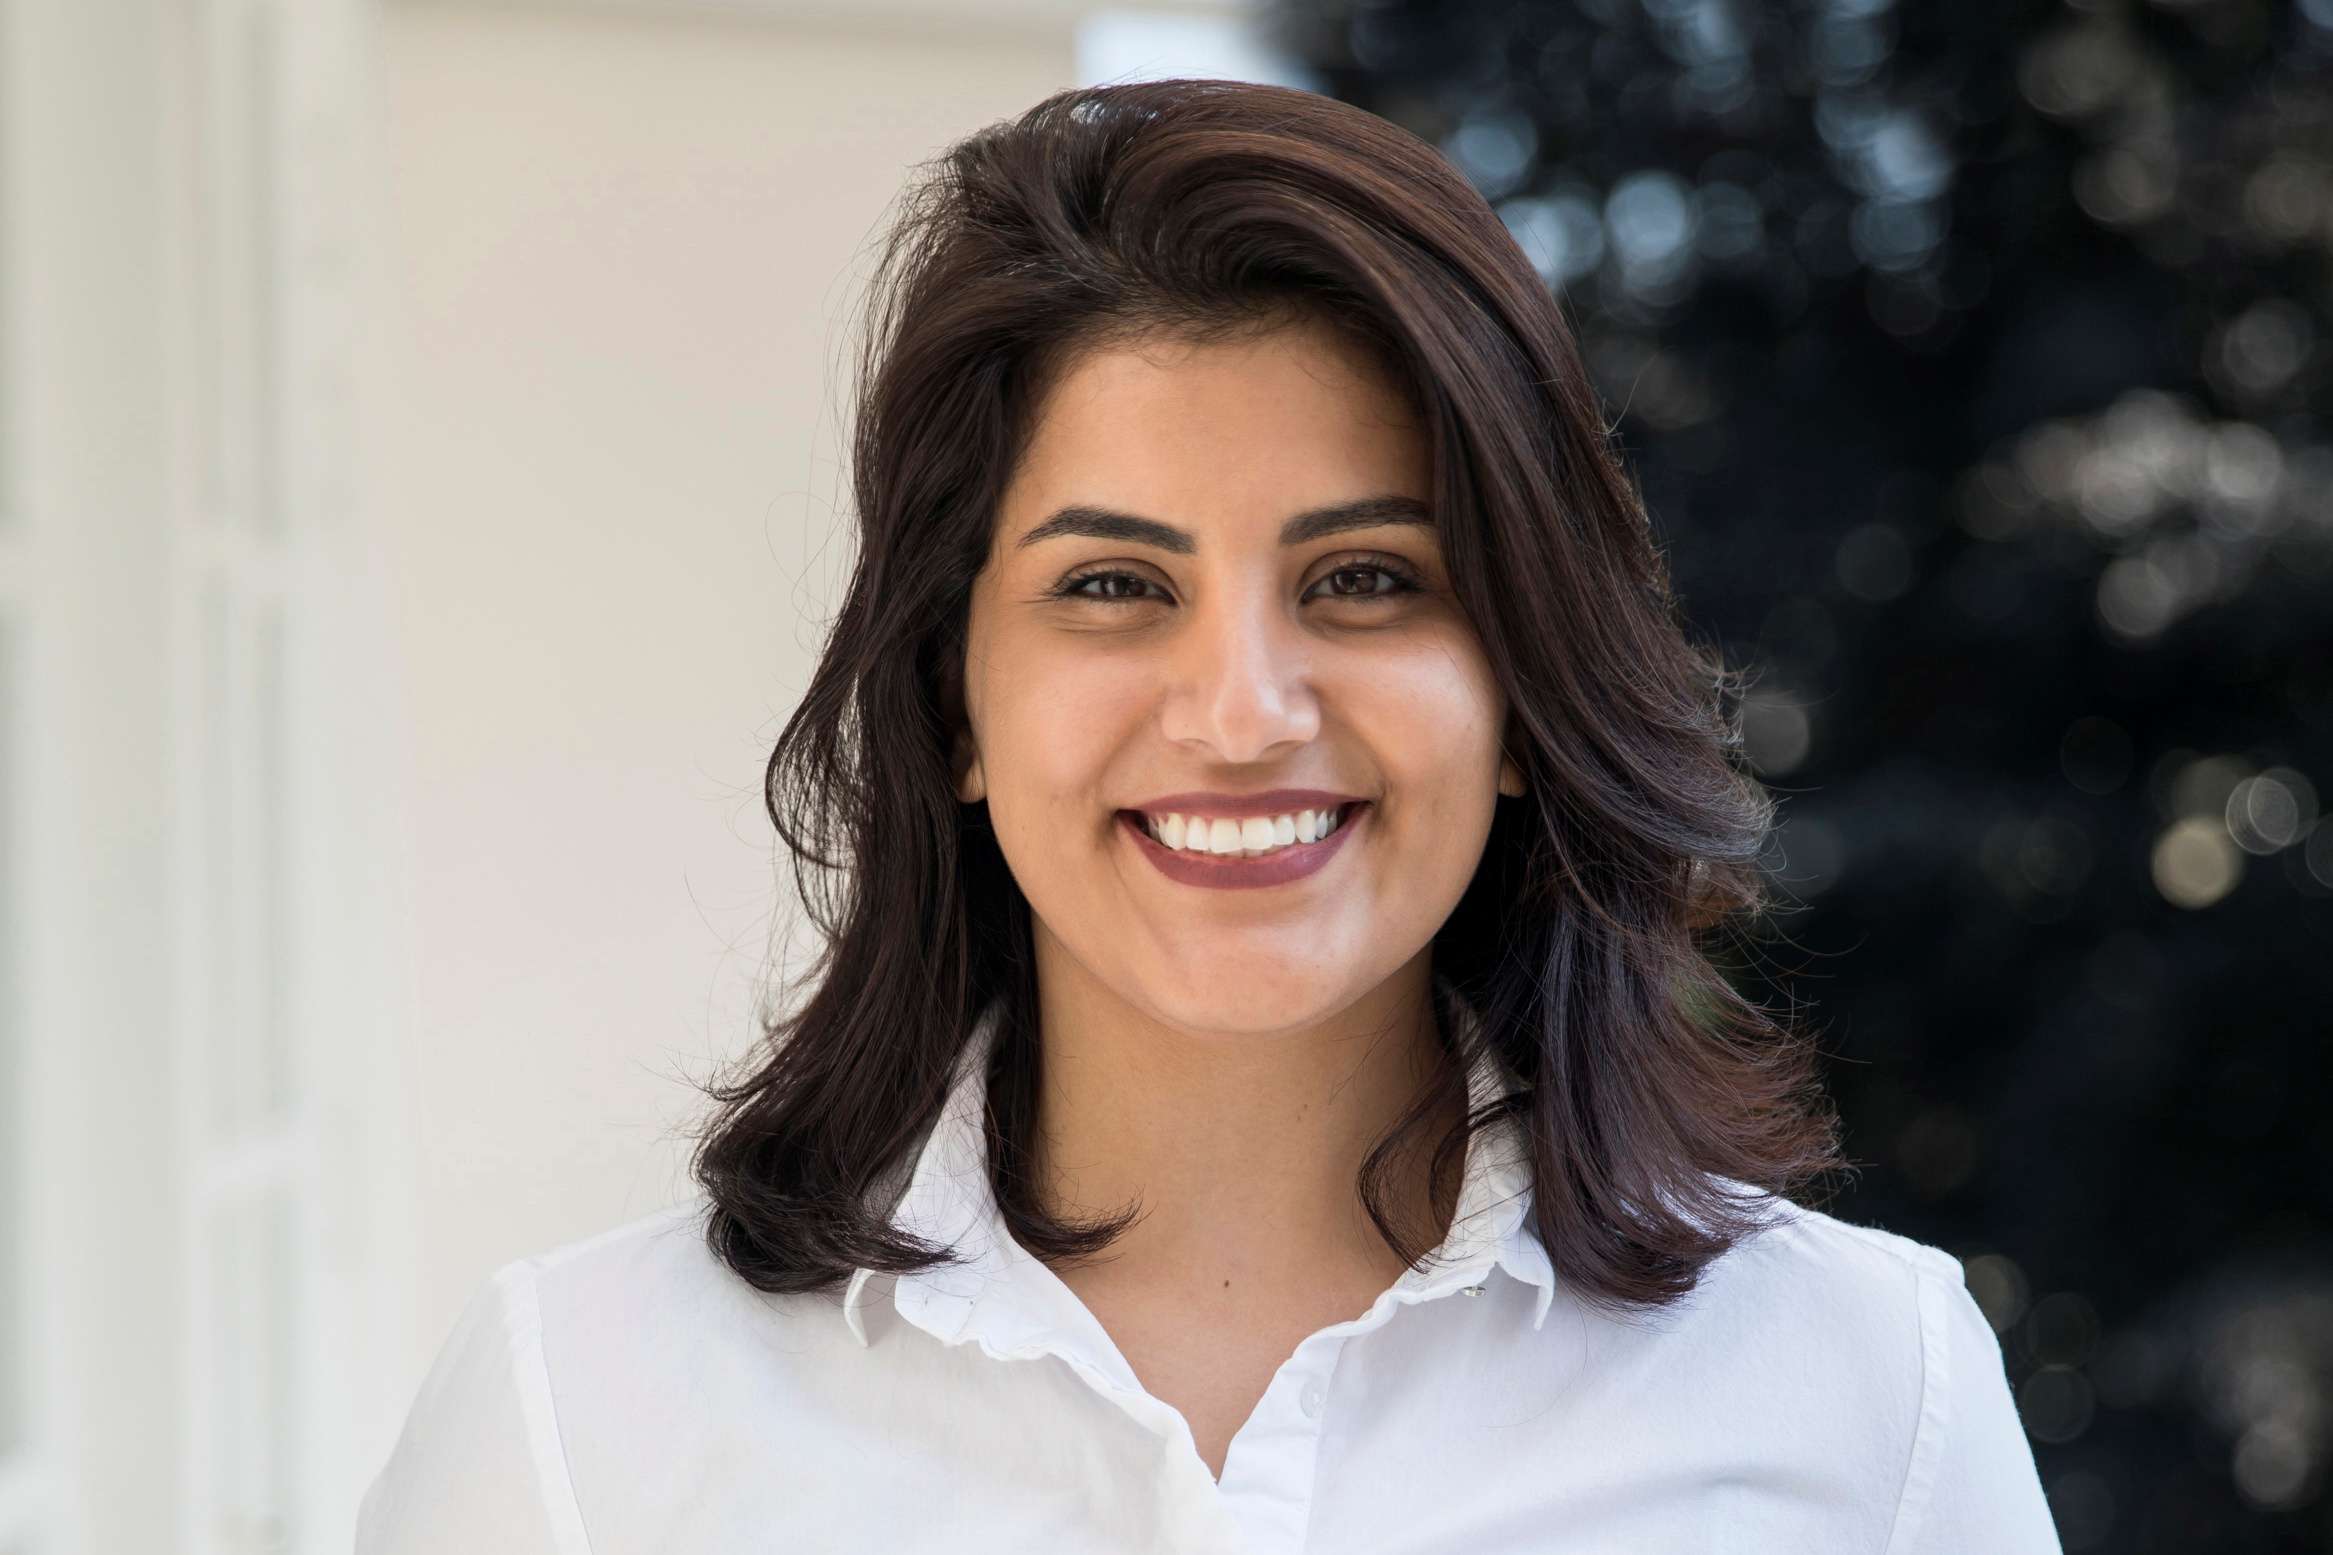 Hathloul was one of the activists who faced sexual harassment and torture during interrogation, according to her family and rights groups.